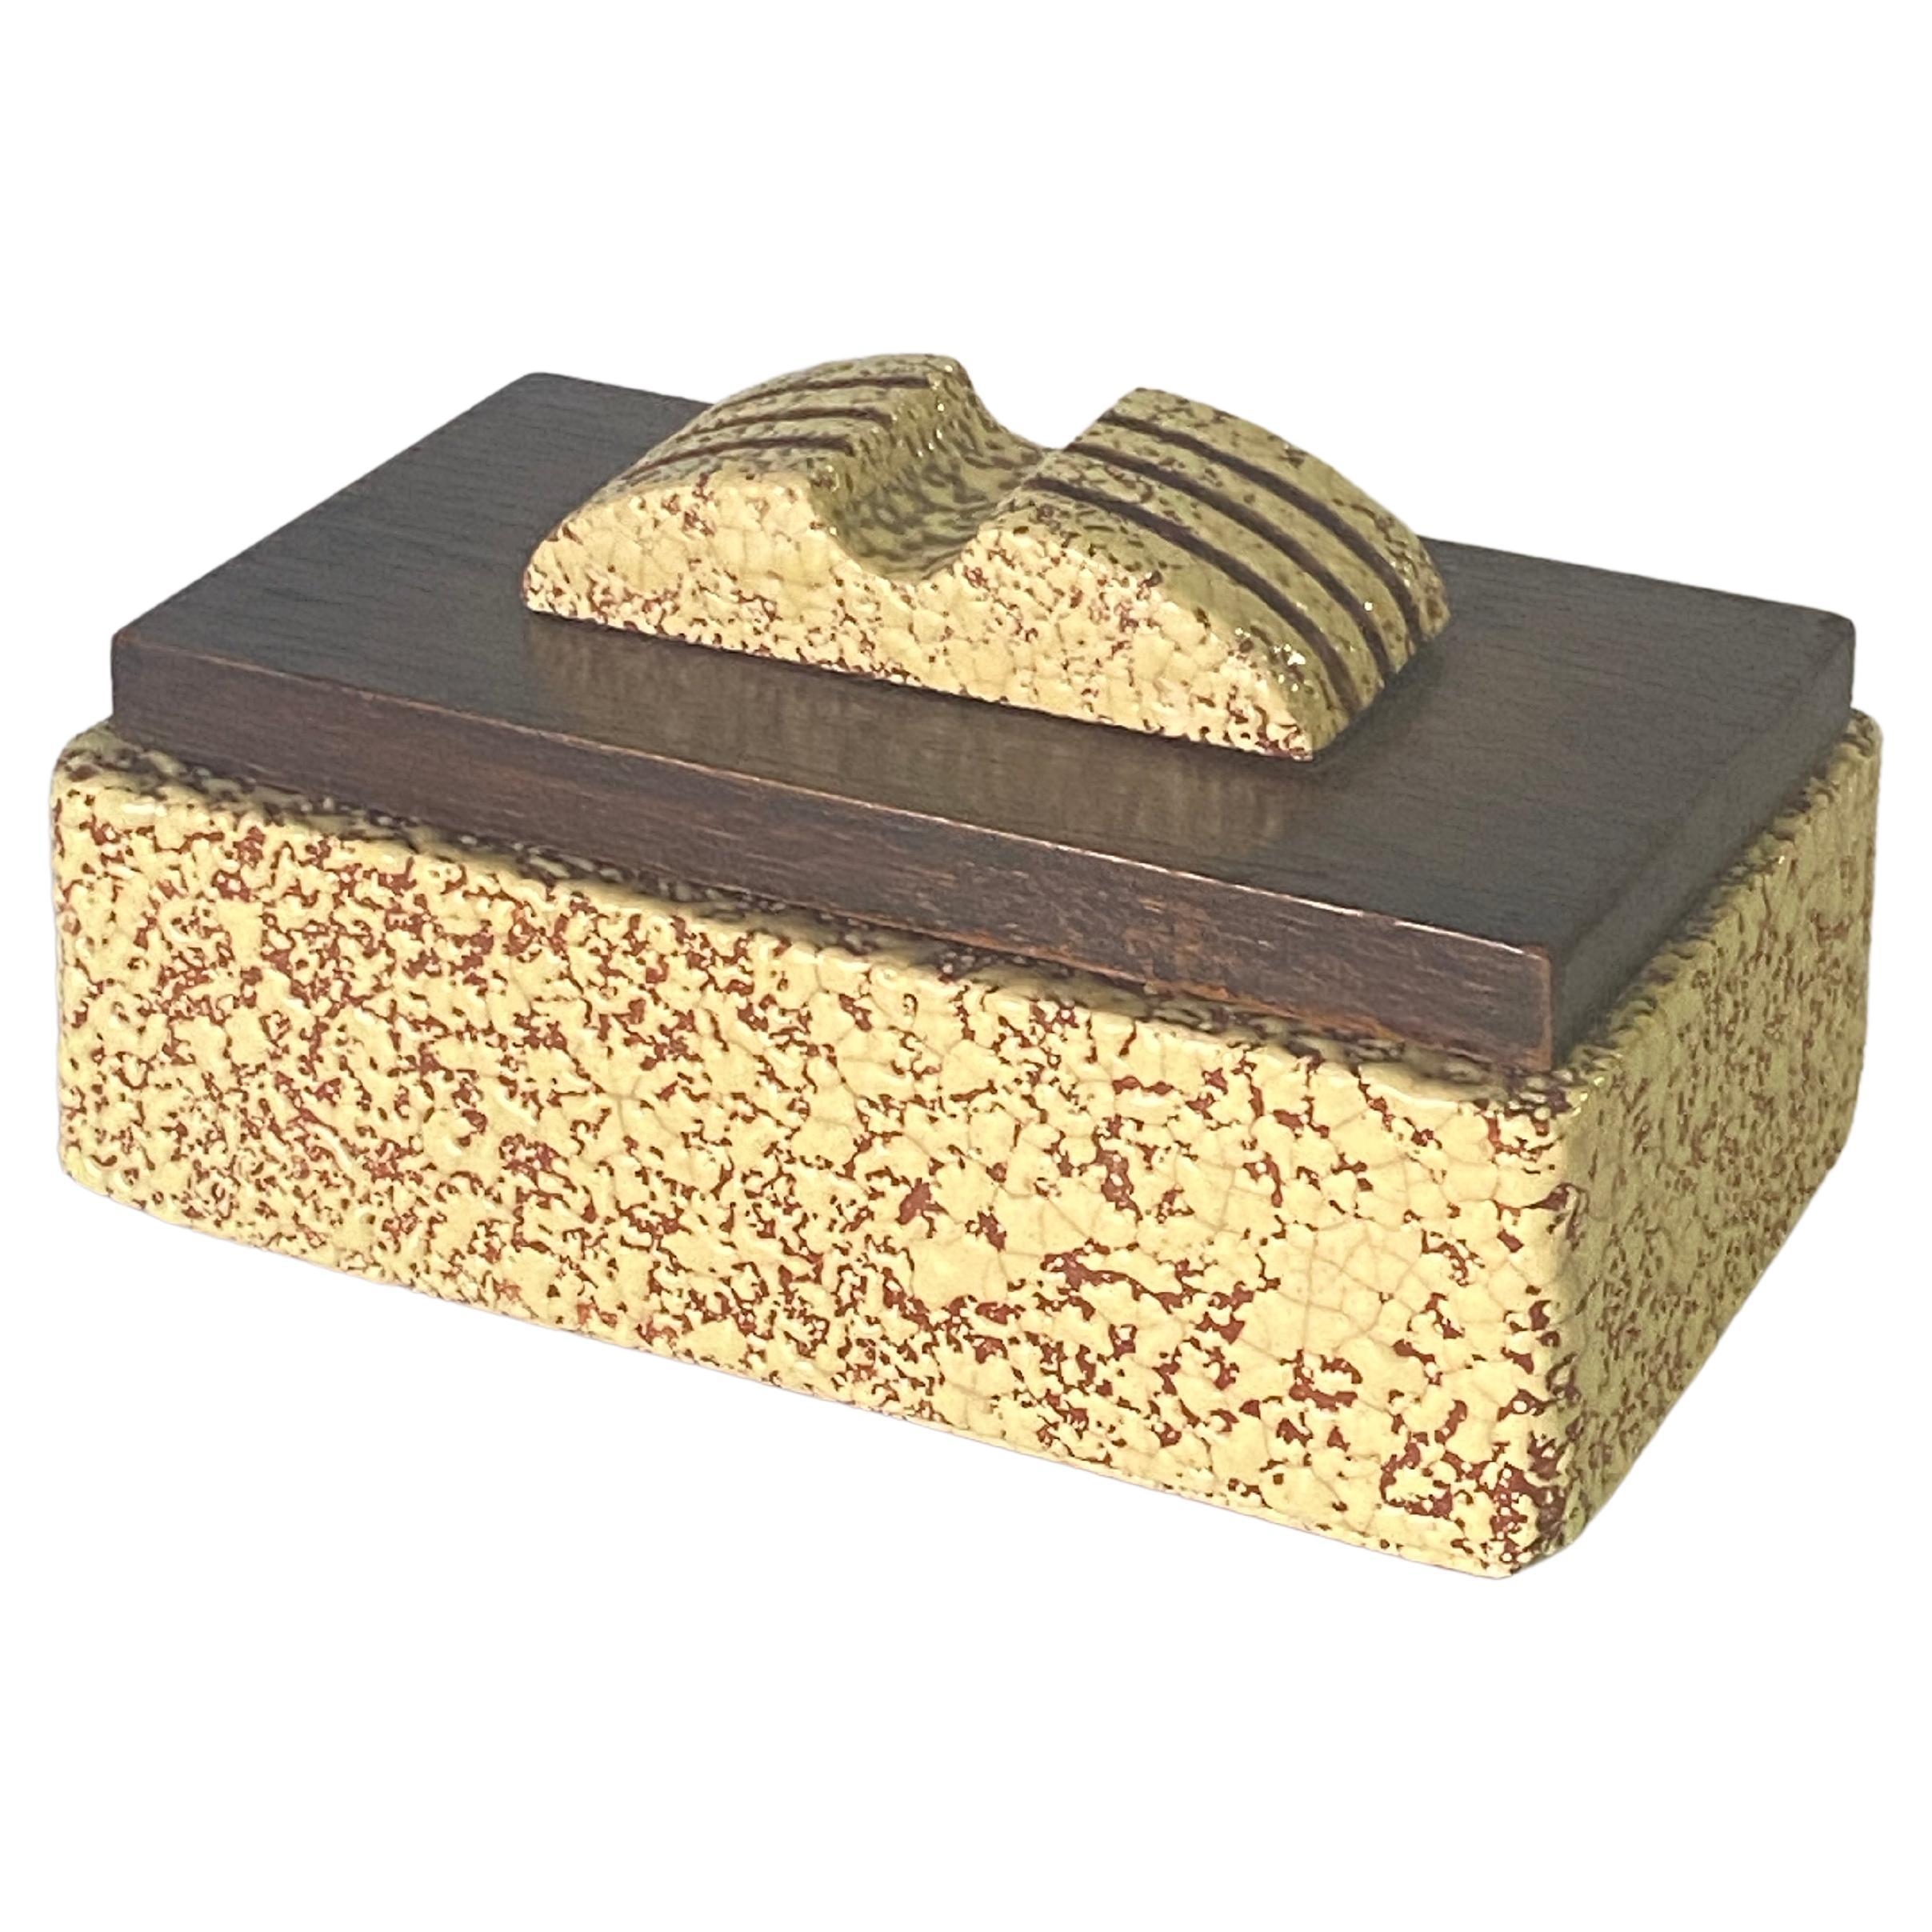 Decorative Box in Wood and Ceramic, Art Deco Period, Brown Color, France, 1940 For Sale